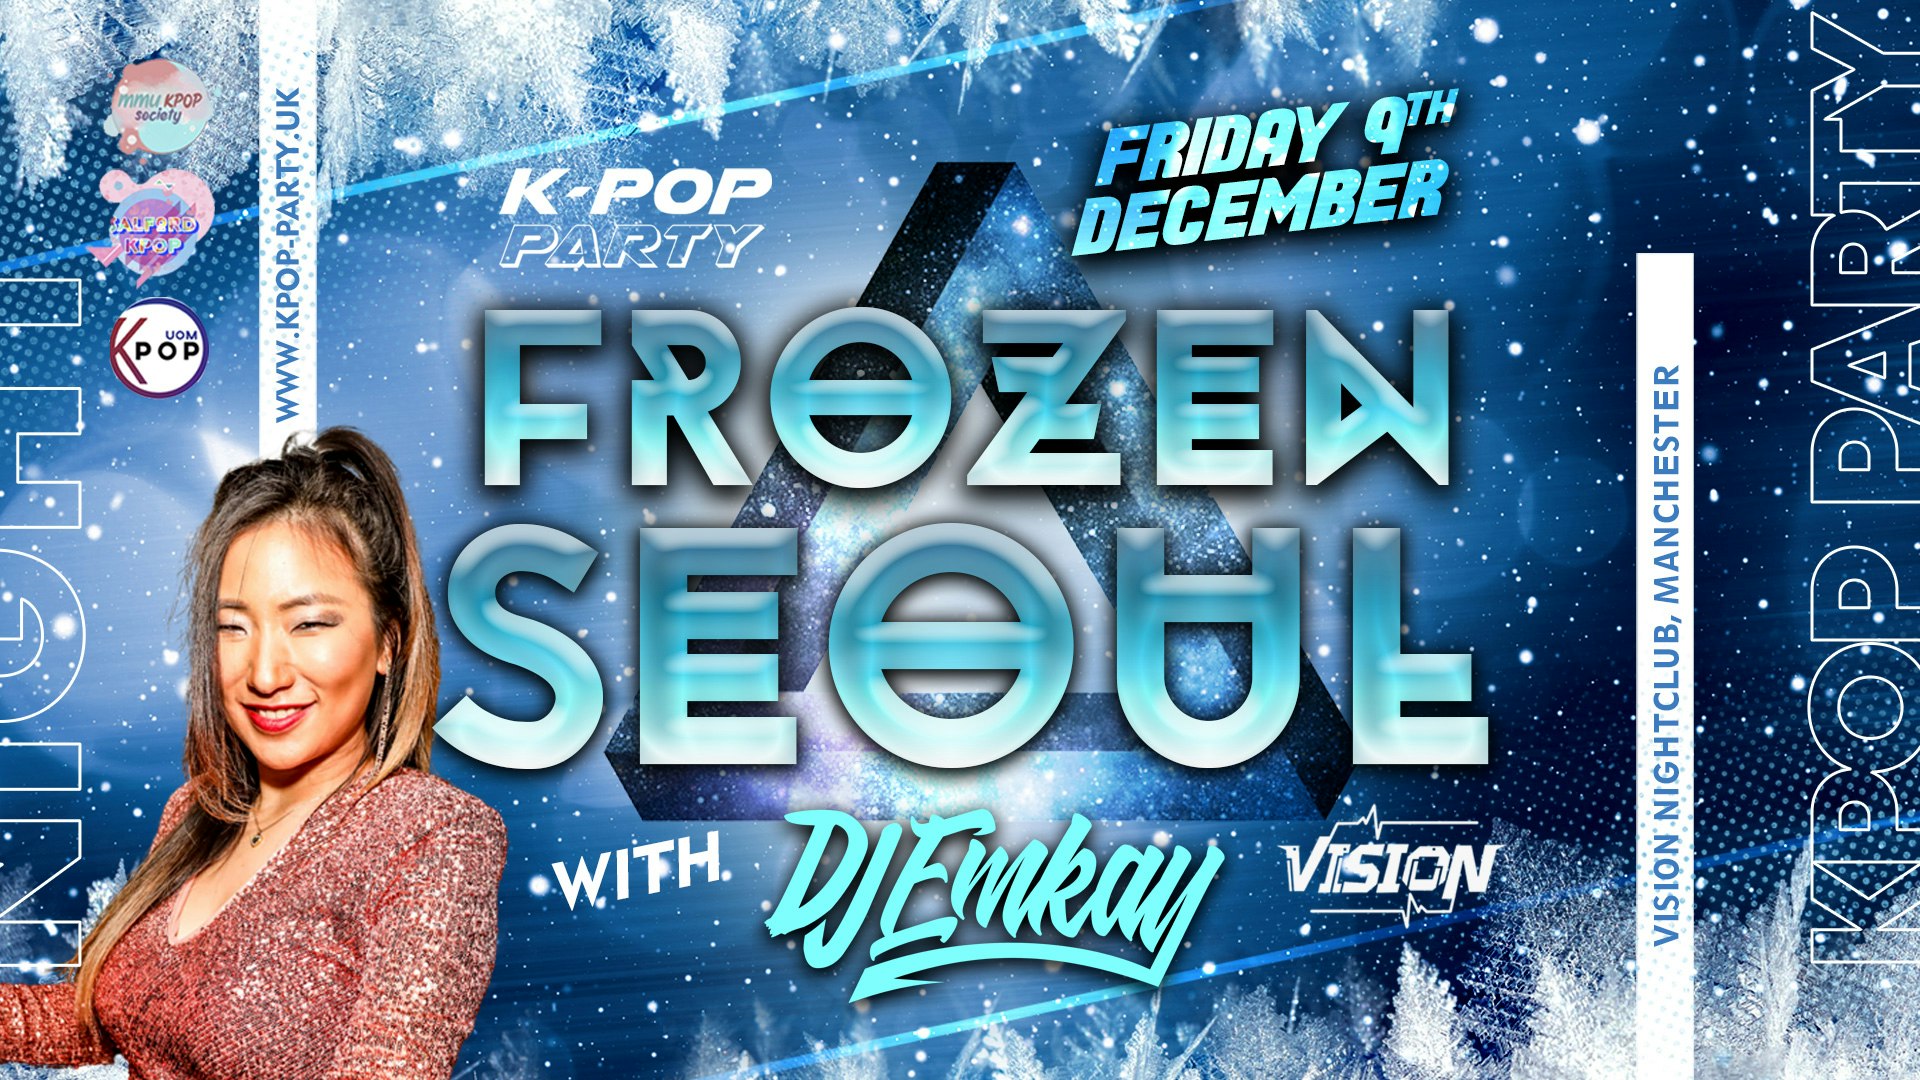 K-Pop Party Manchester – FROZEN SEOUL WITH DJ EMKAY | FRIDAY 9TH DECEMBER